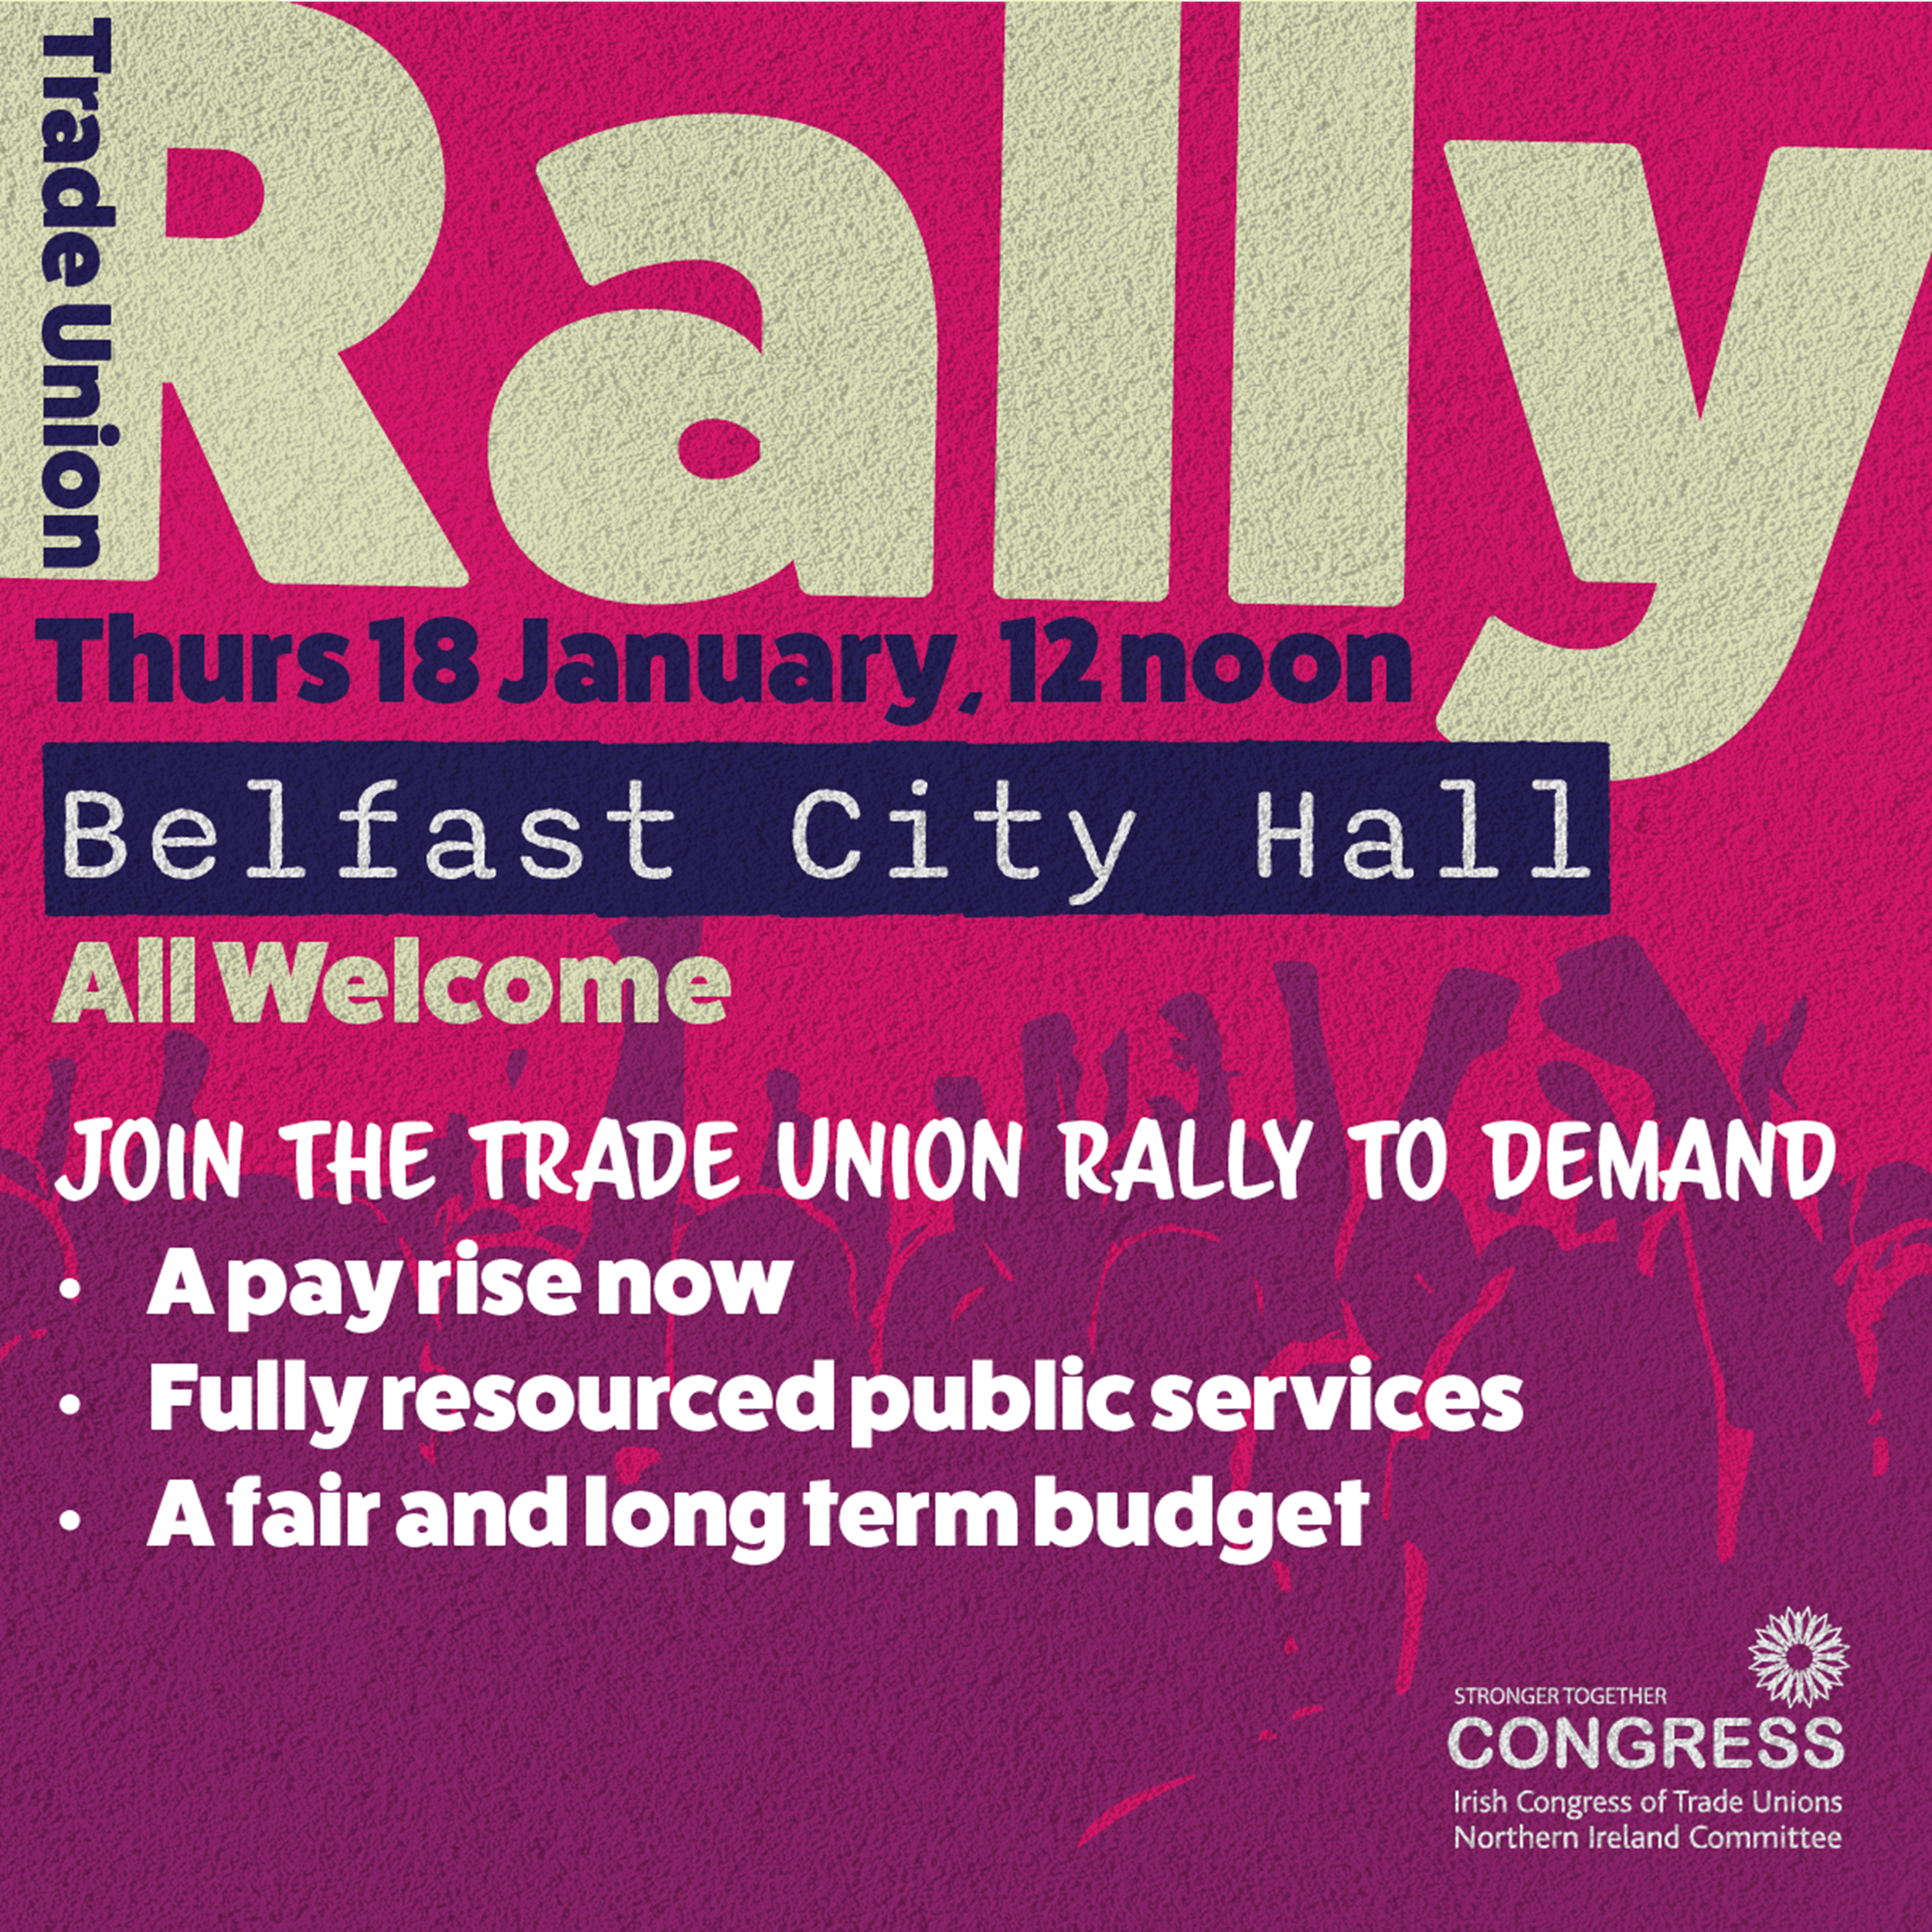 A poster advertising a trade union rally at Belfast City Hall on Thursday January 18th. 